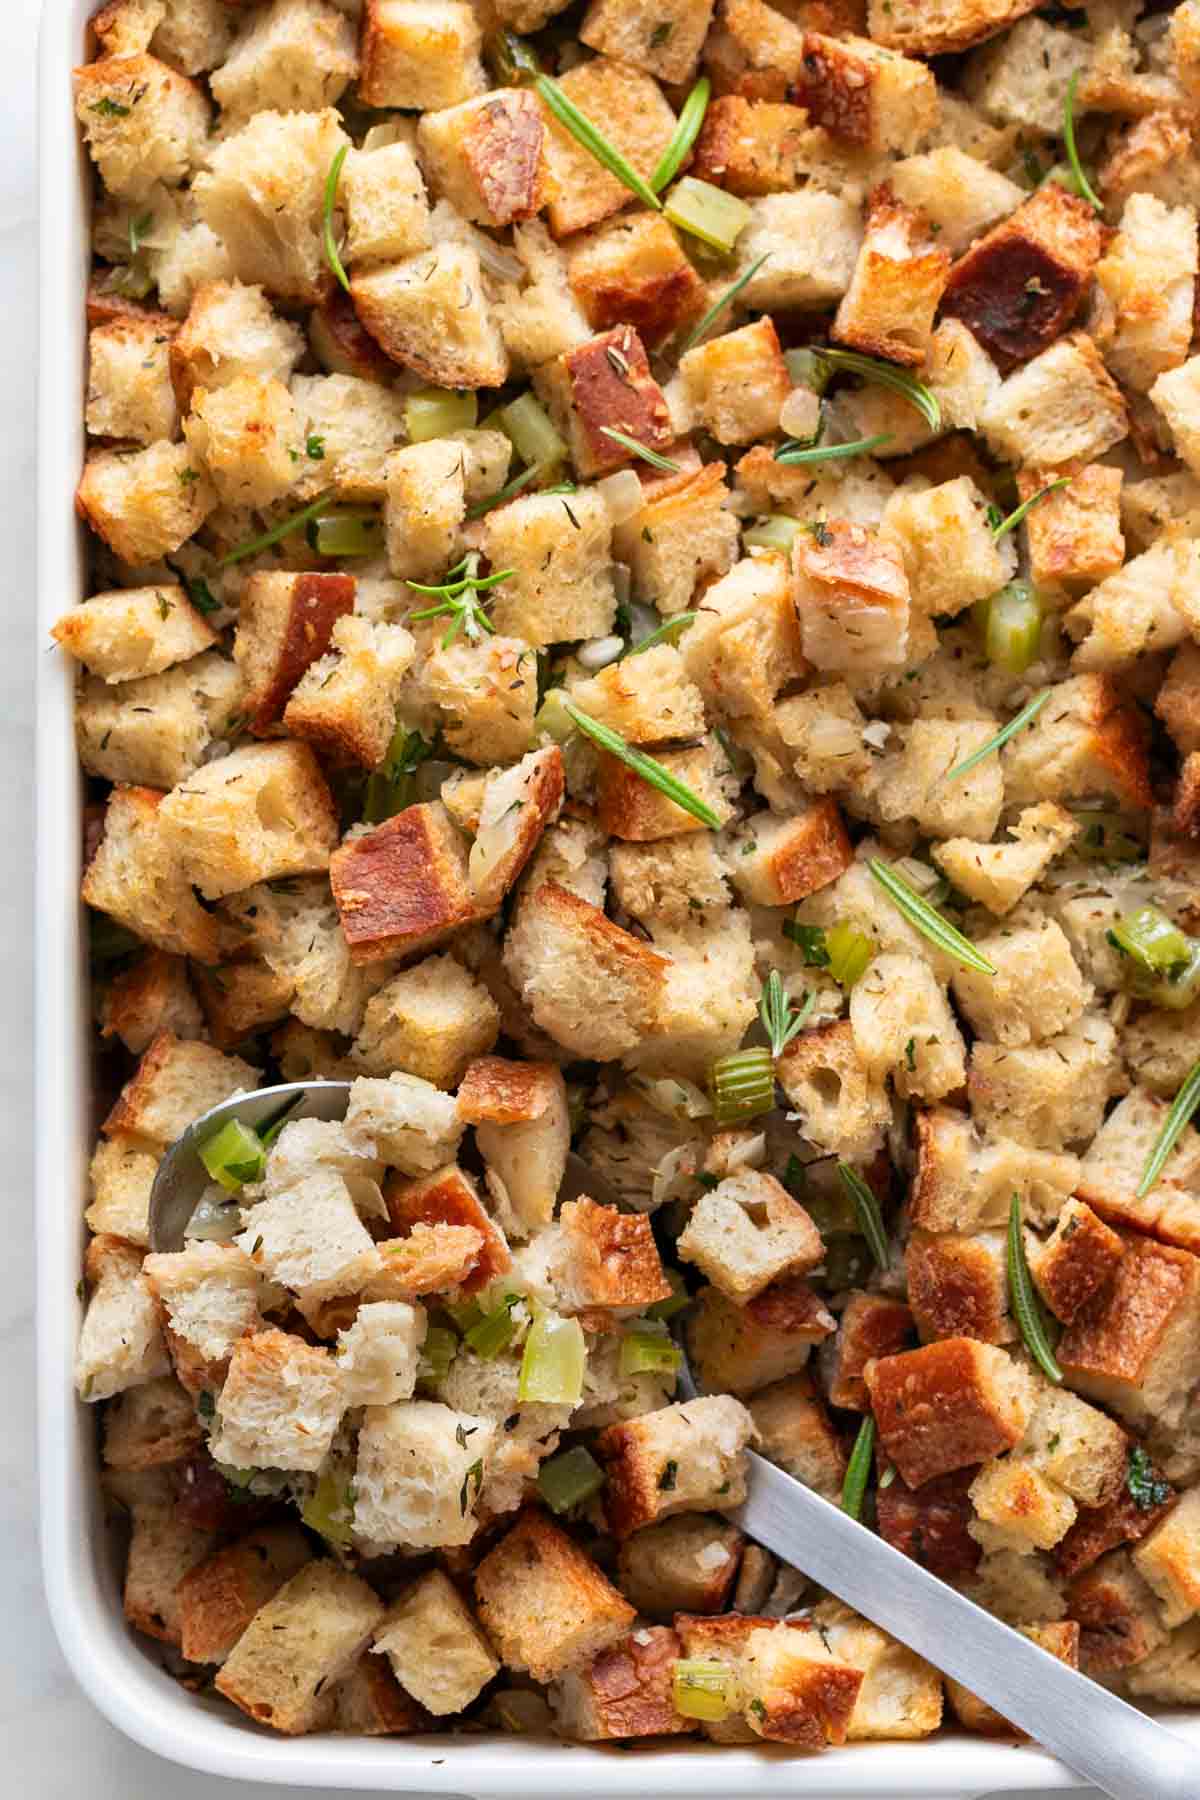 Vegan stuffing in a baking dish with a serving spoon.